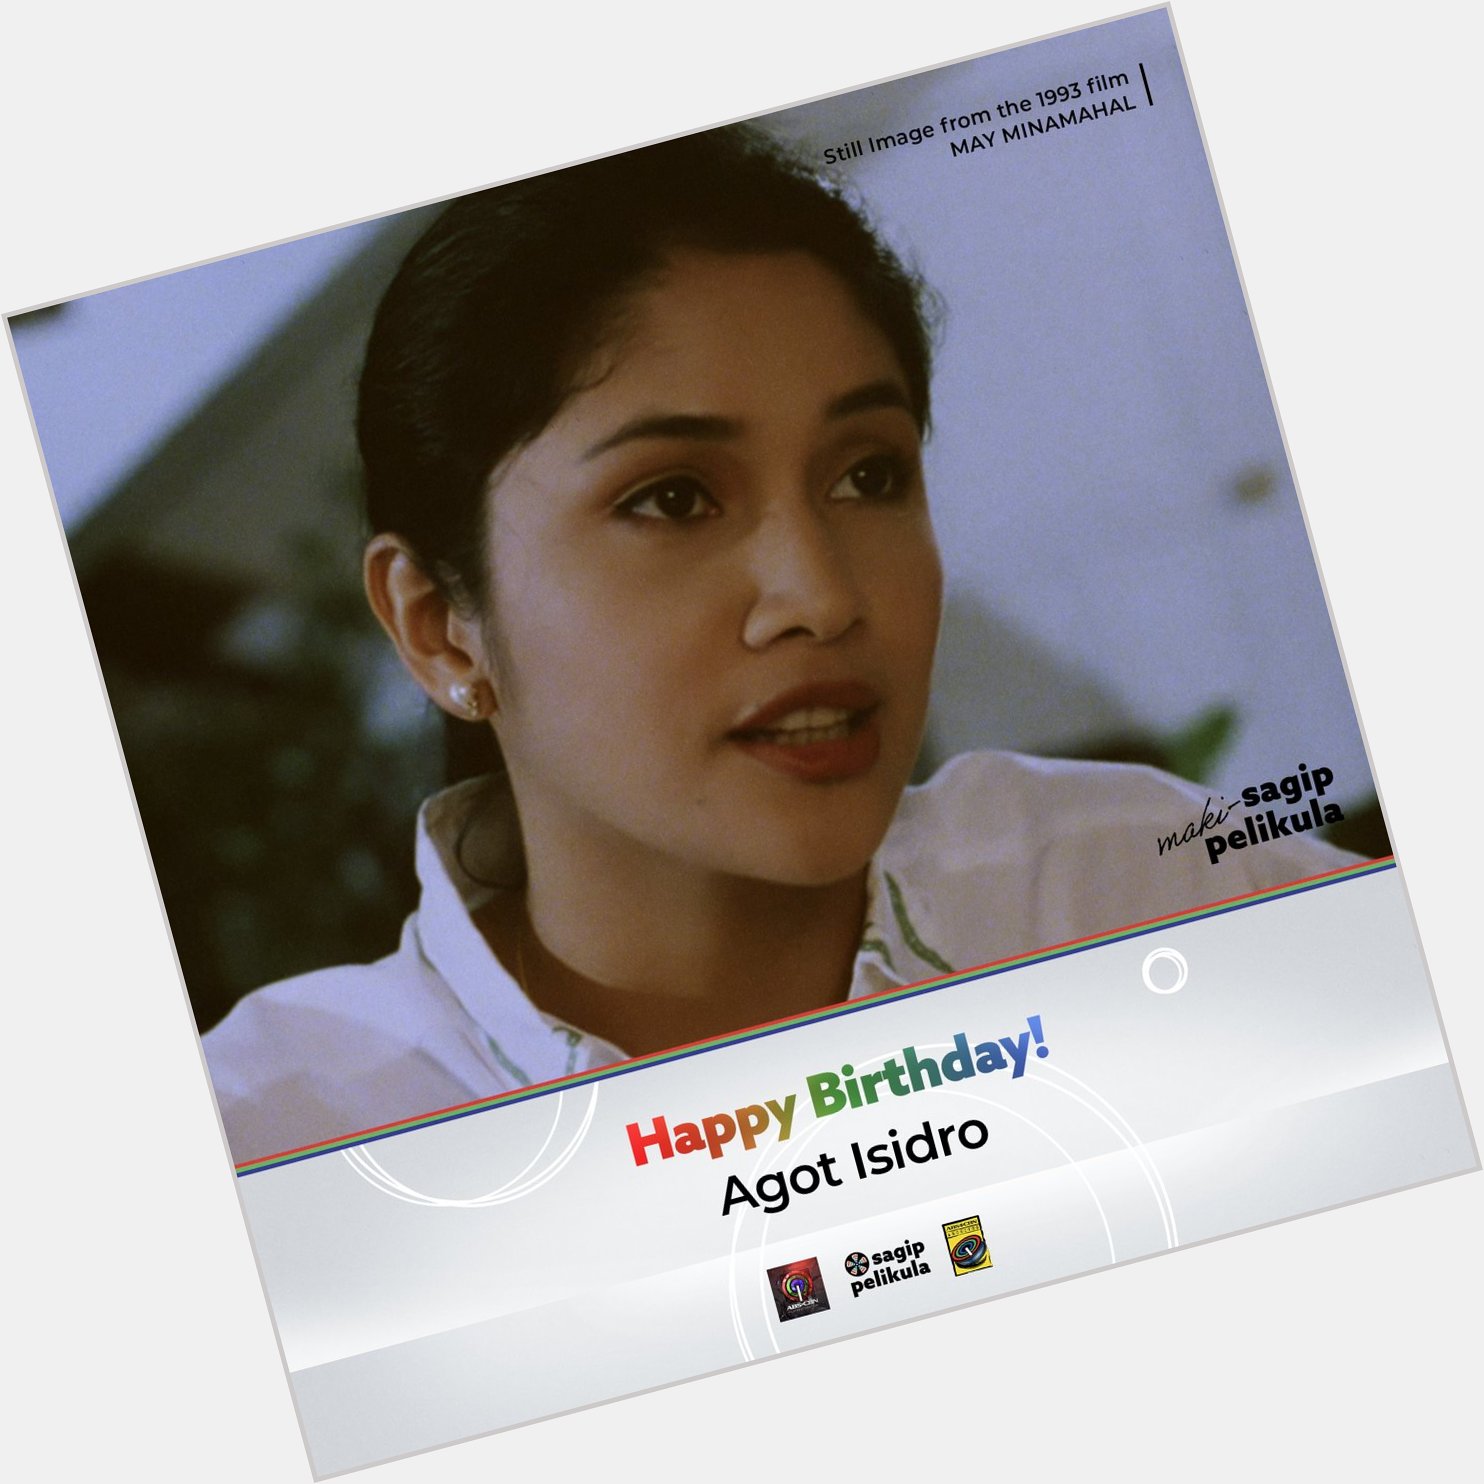 Happy birthday to Agot Isidro!

What\s your favorite film of hers?   